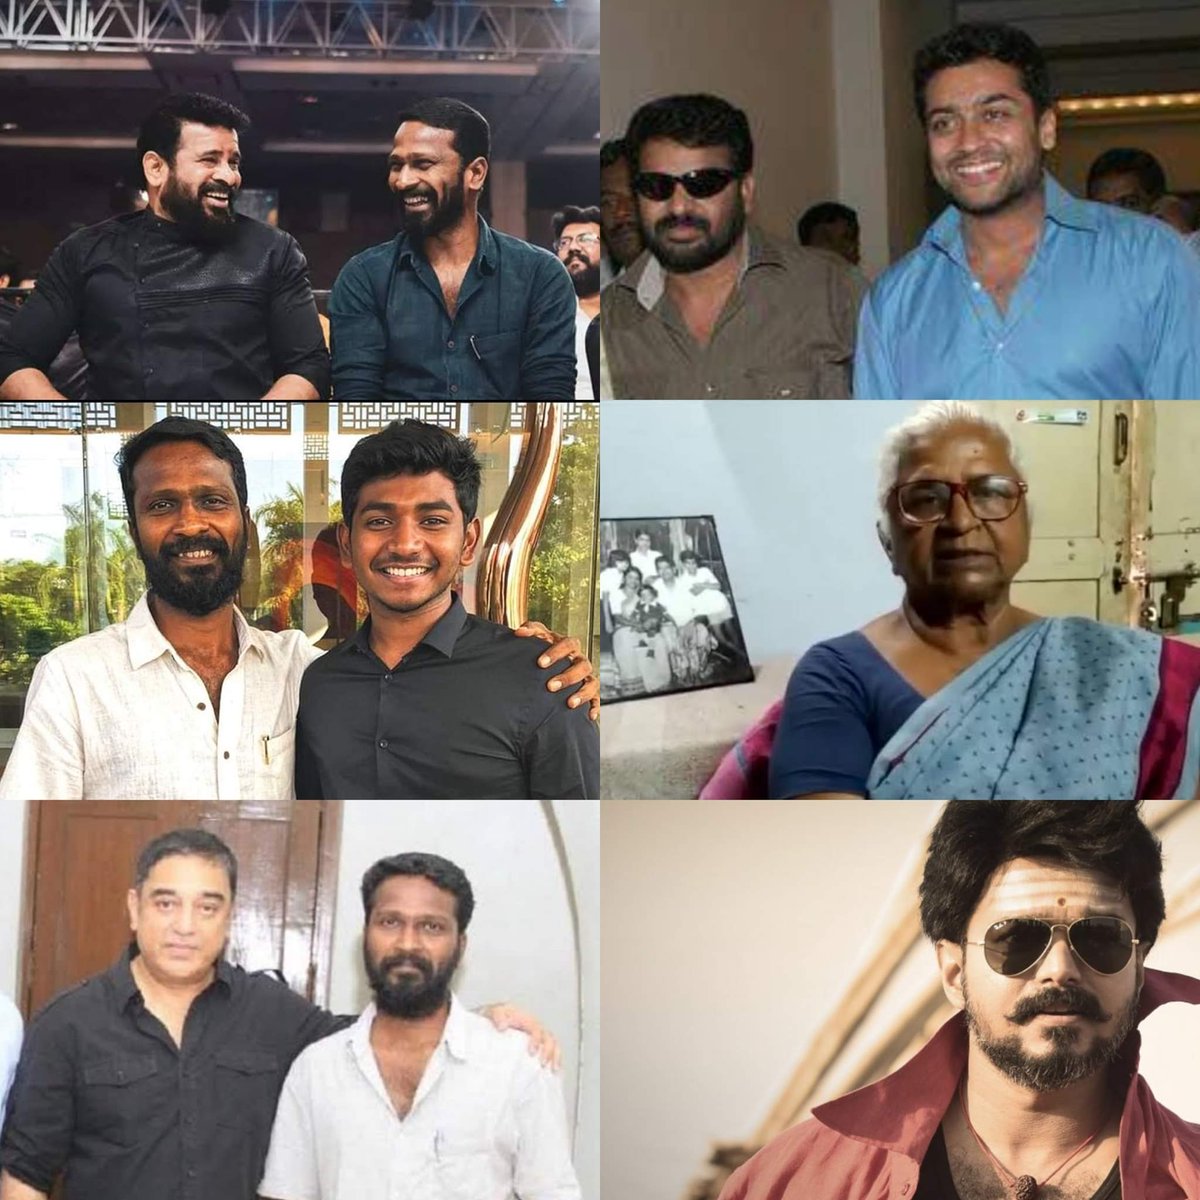 Director #Vetrimaaran has spoken about his upcoming projects in Vikatan. 

- As of now, only two actors have been finalized for #Vaadivasal - #Suriya in the lead, and #Ameer in an important role.

- Scripted #RaghavaLawrence starrer #Adhigaaram directed by #DuraiSenthilKumar.